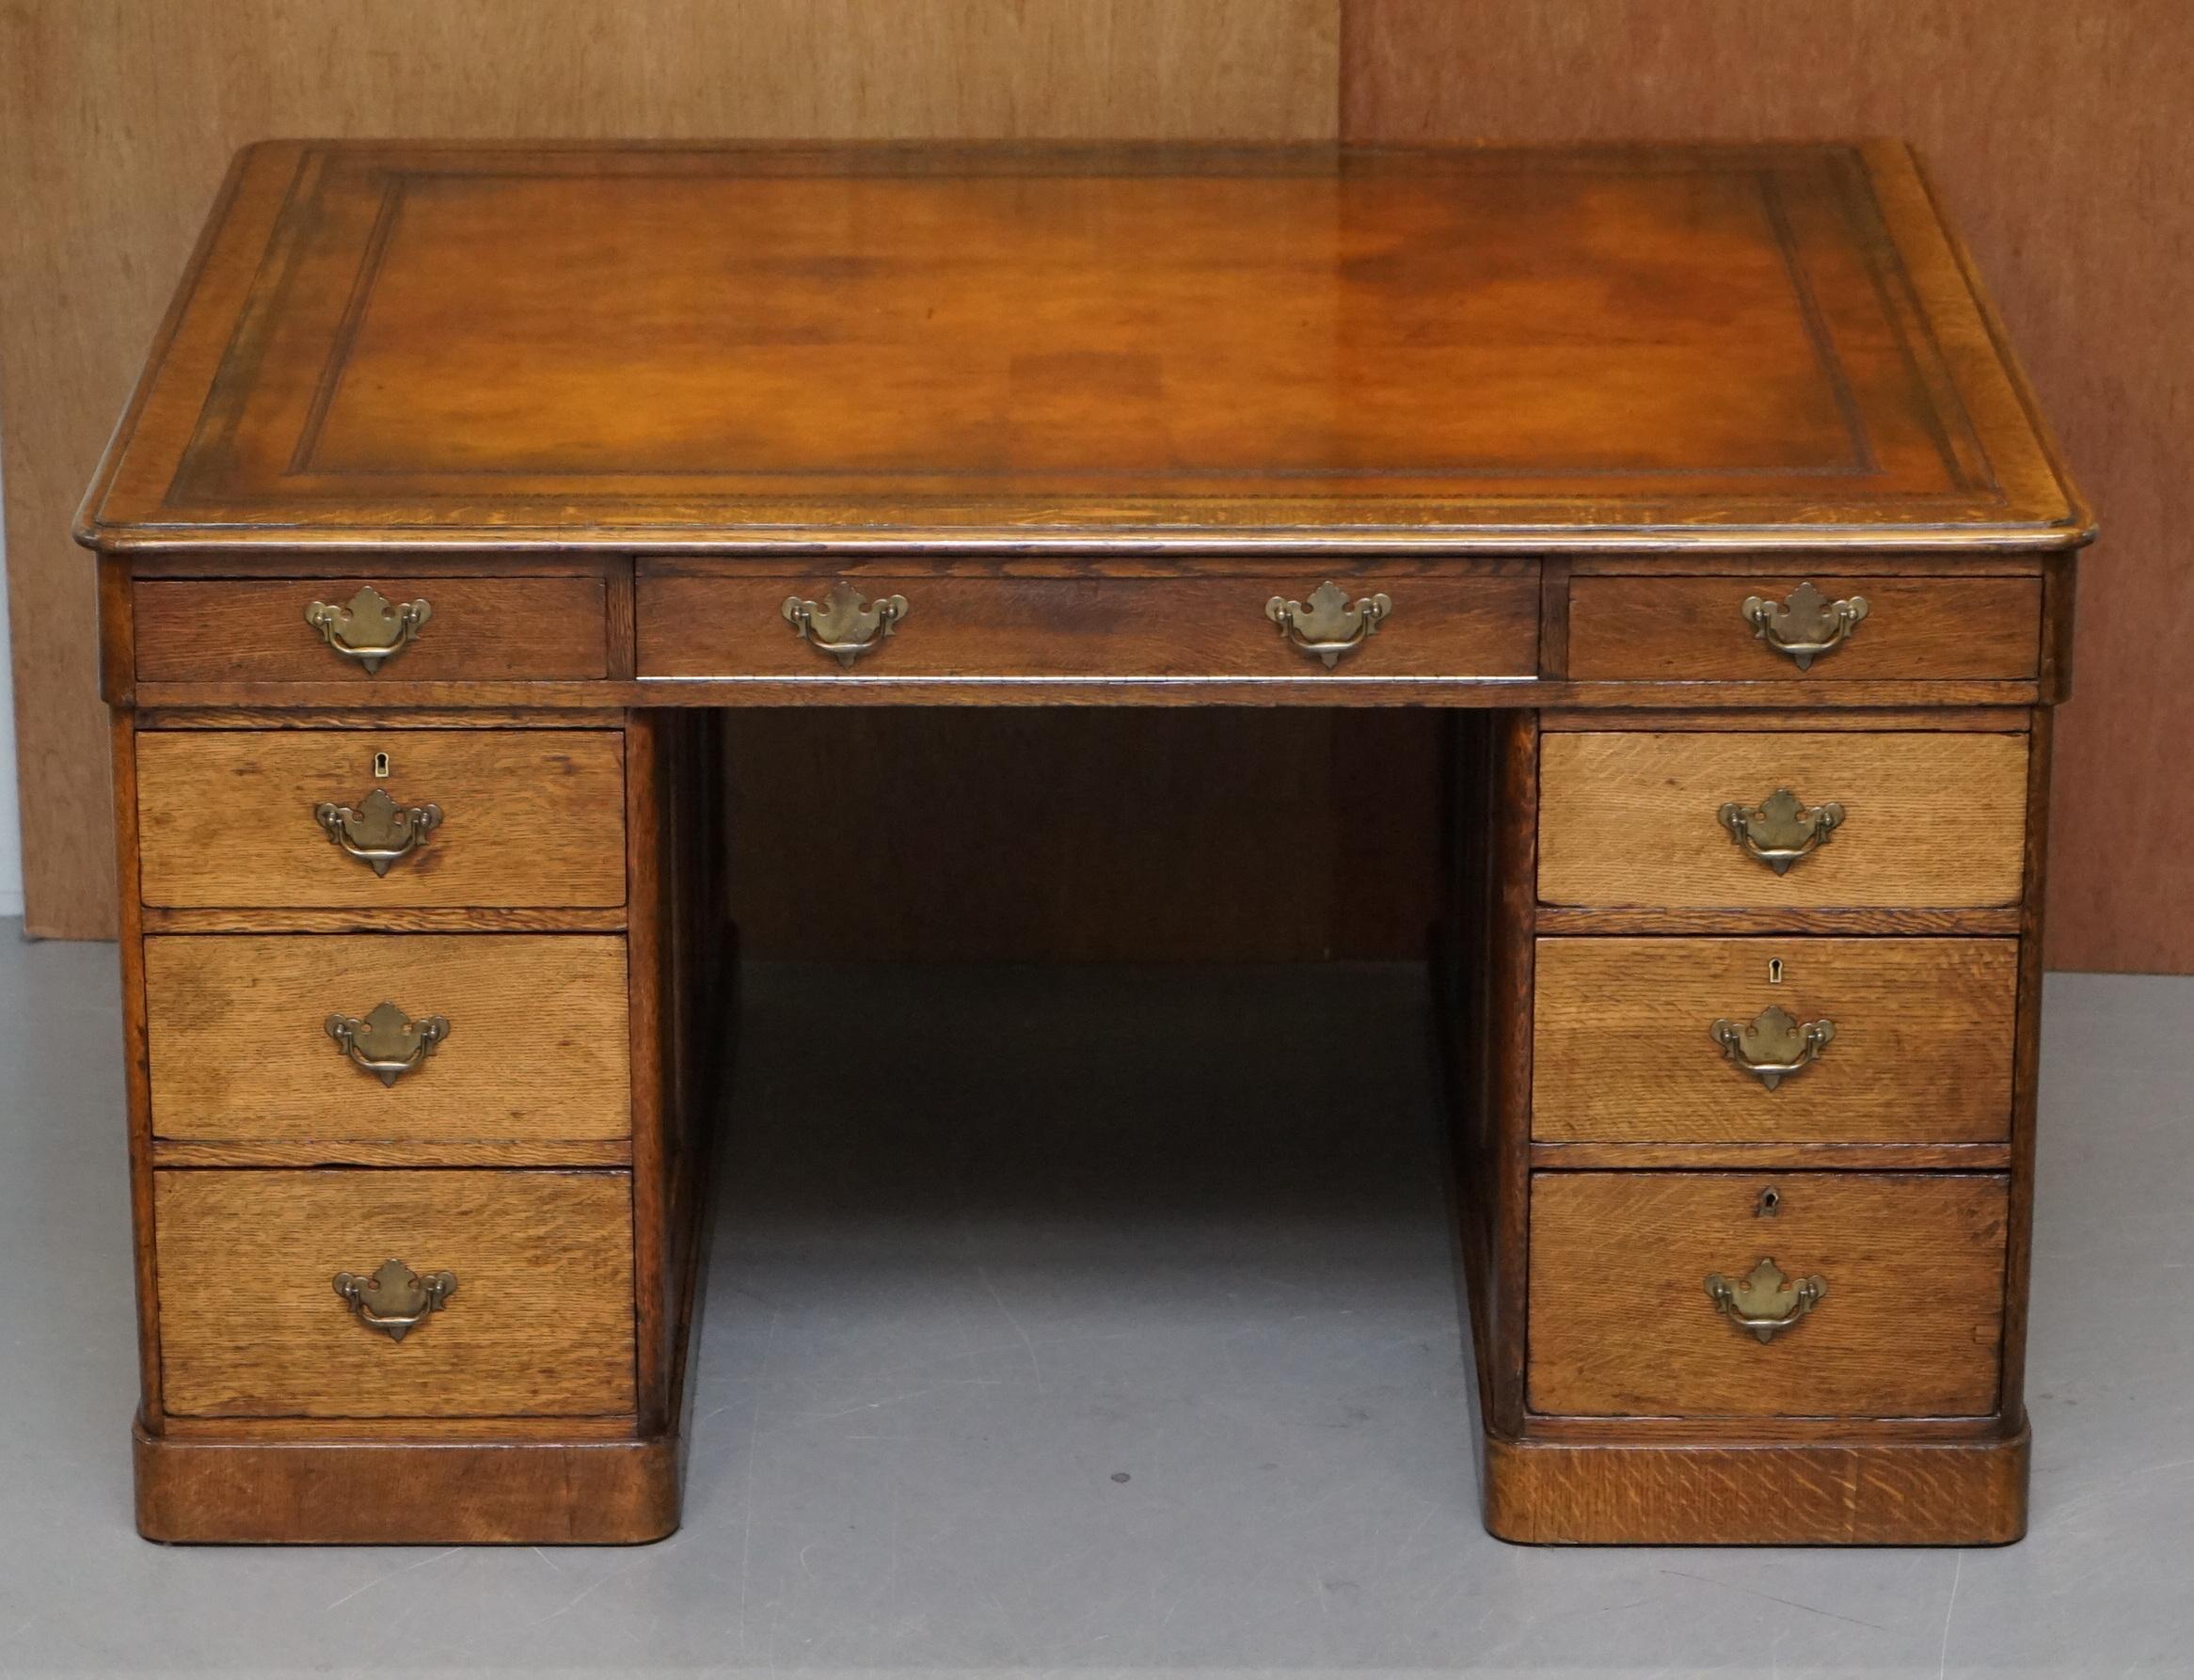 We are delighted to offer for sale this lovely restored circa 1820 Georgian Oak with restored hand dyed brown leather top, twin pedestal double sided partner desk

A very well made piece, the timber is English oak which has a glorious patina to it